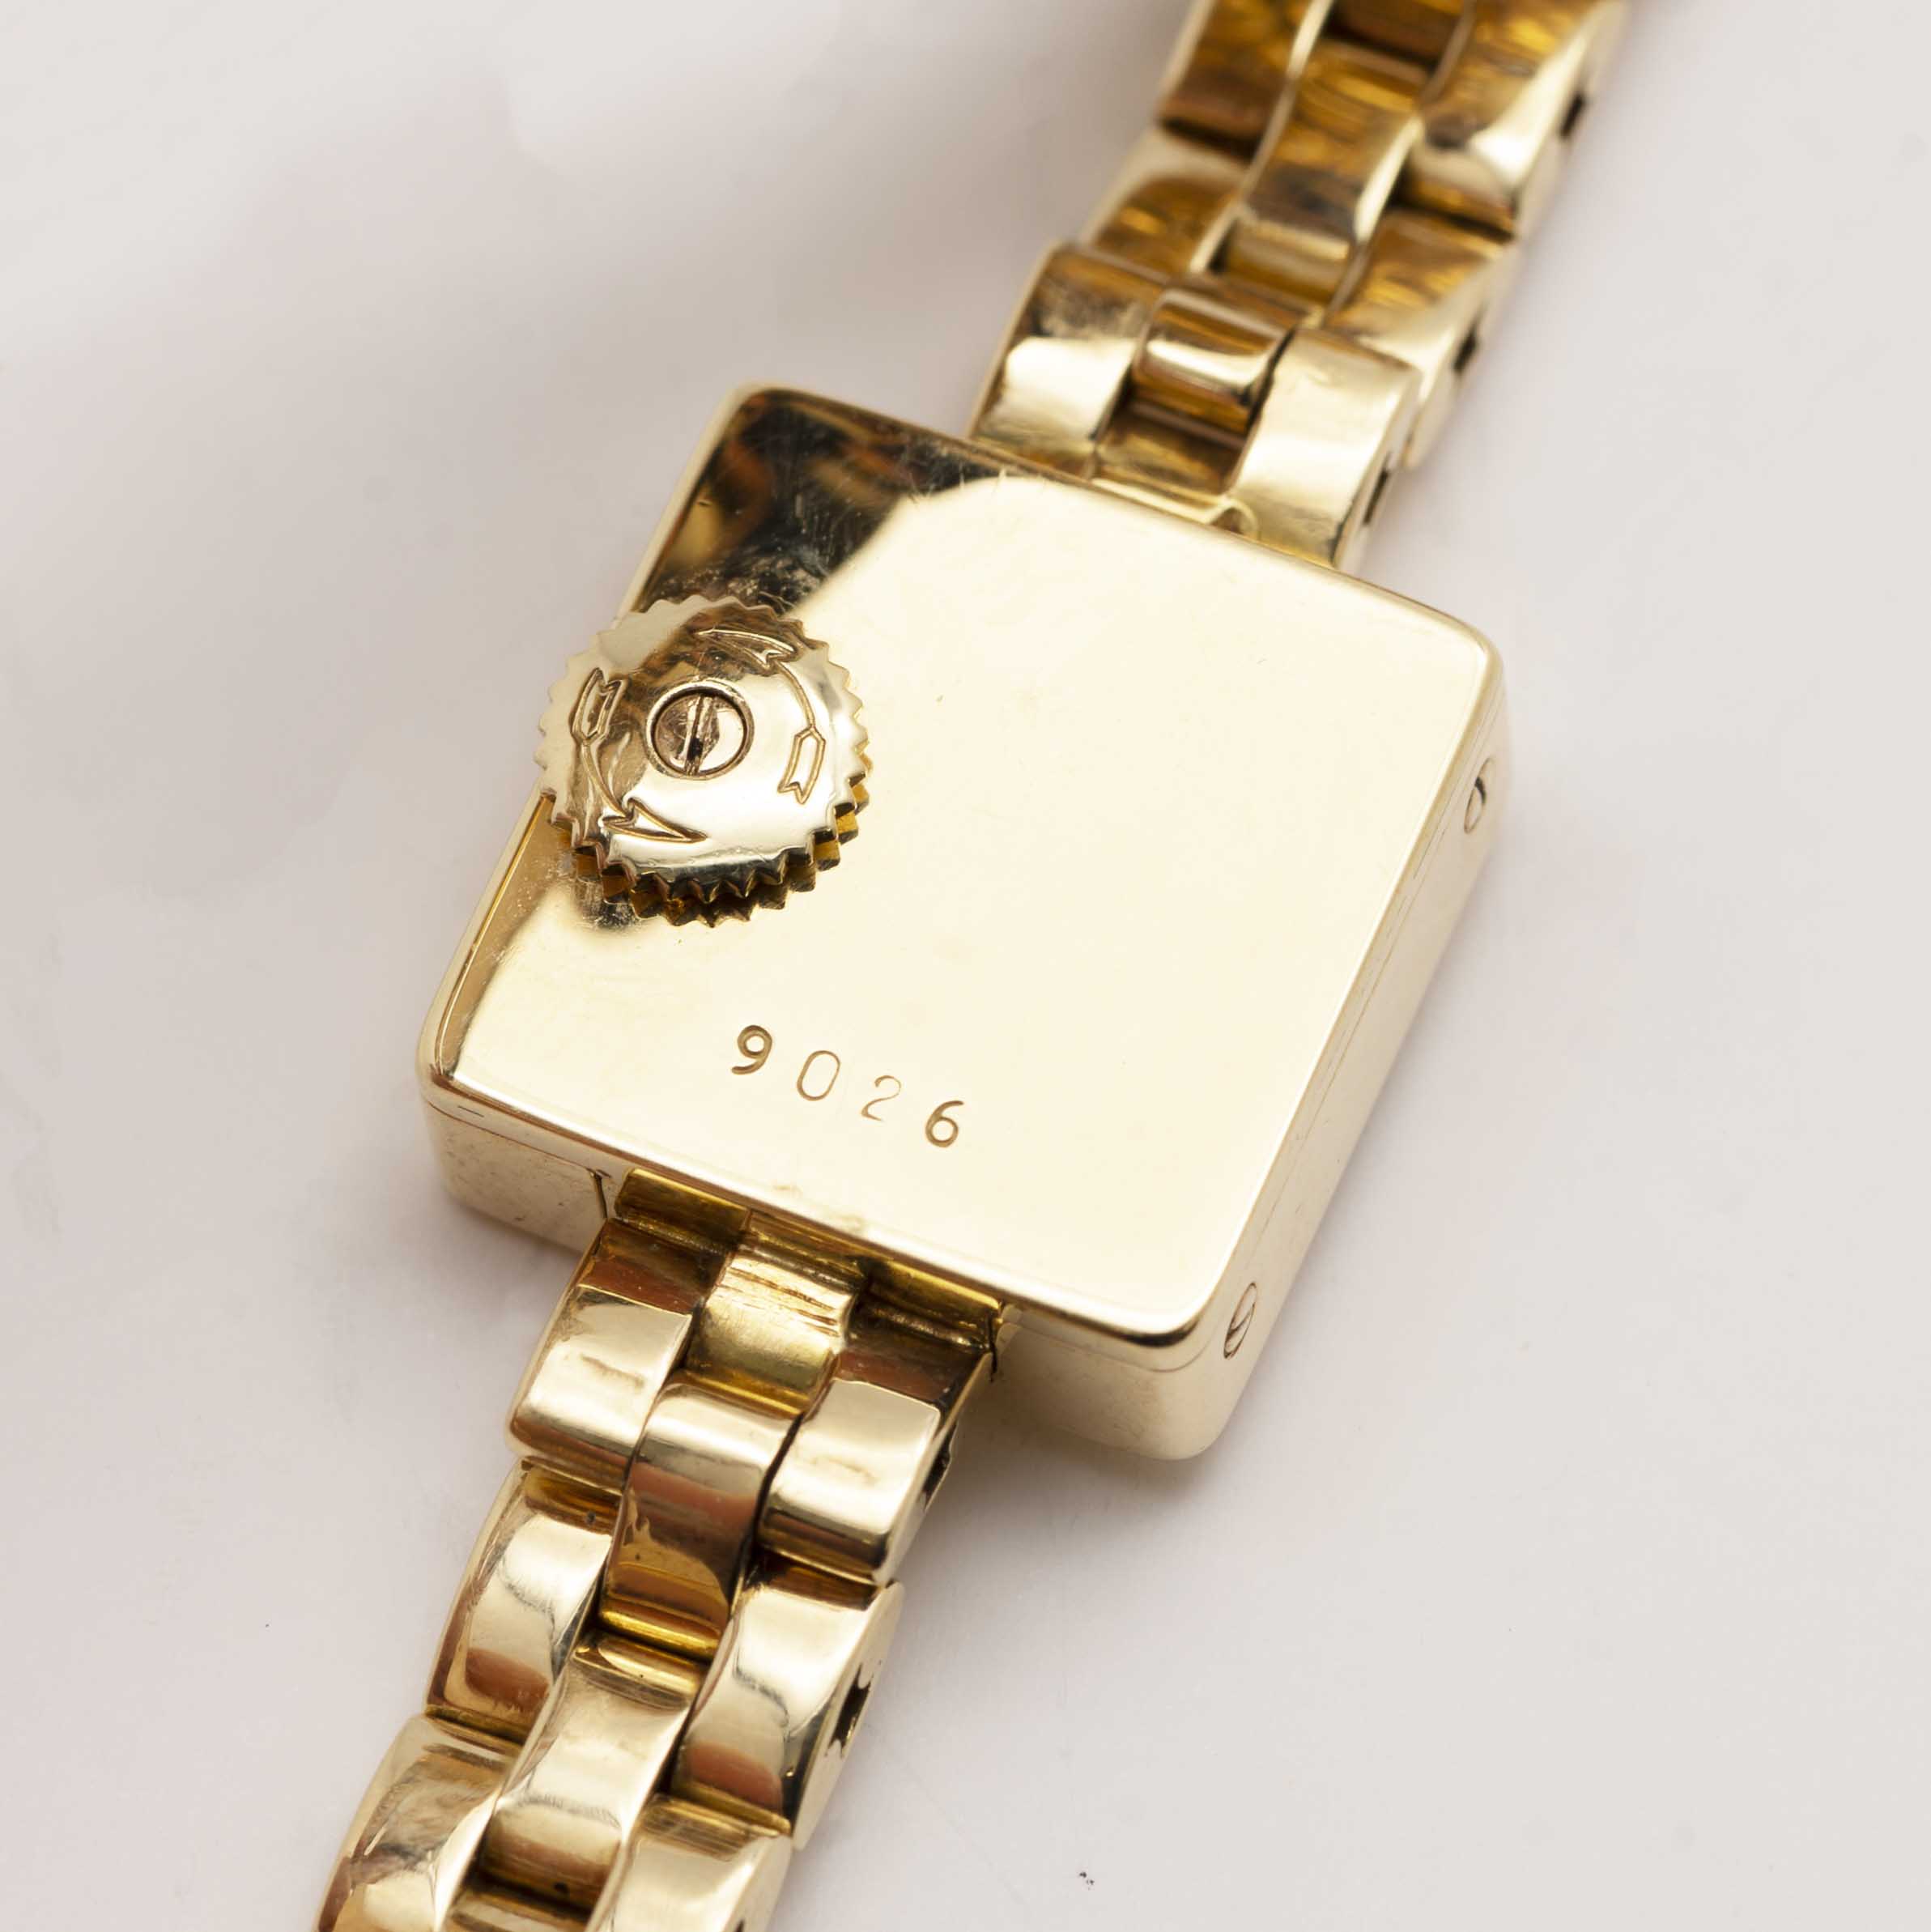 A RARE LADIES 18K SOLID GOLD CARTIER LONDON QUADRANT BRACELET WATCH CIRCA 1970, WITH MATCHING LONDON - Image 7 of 12